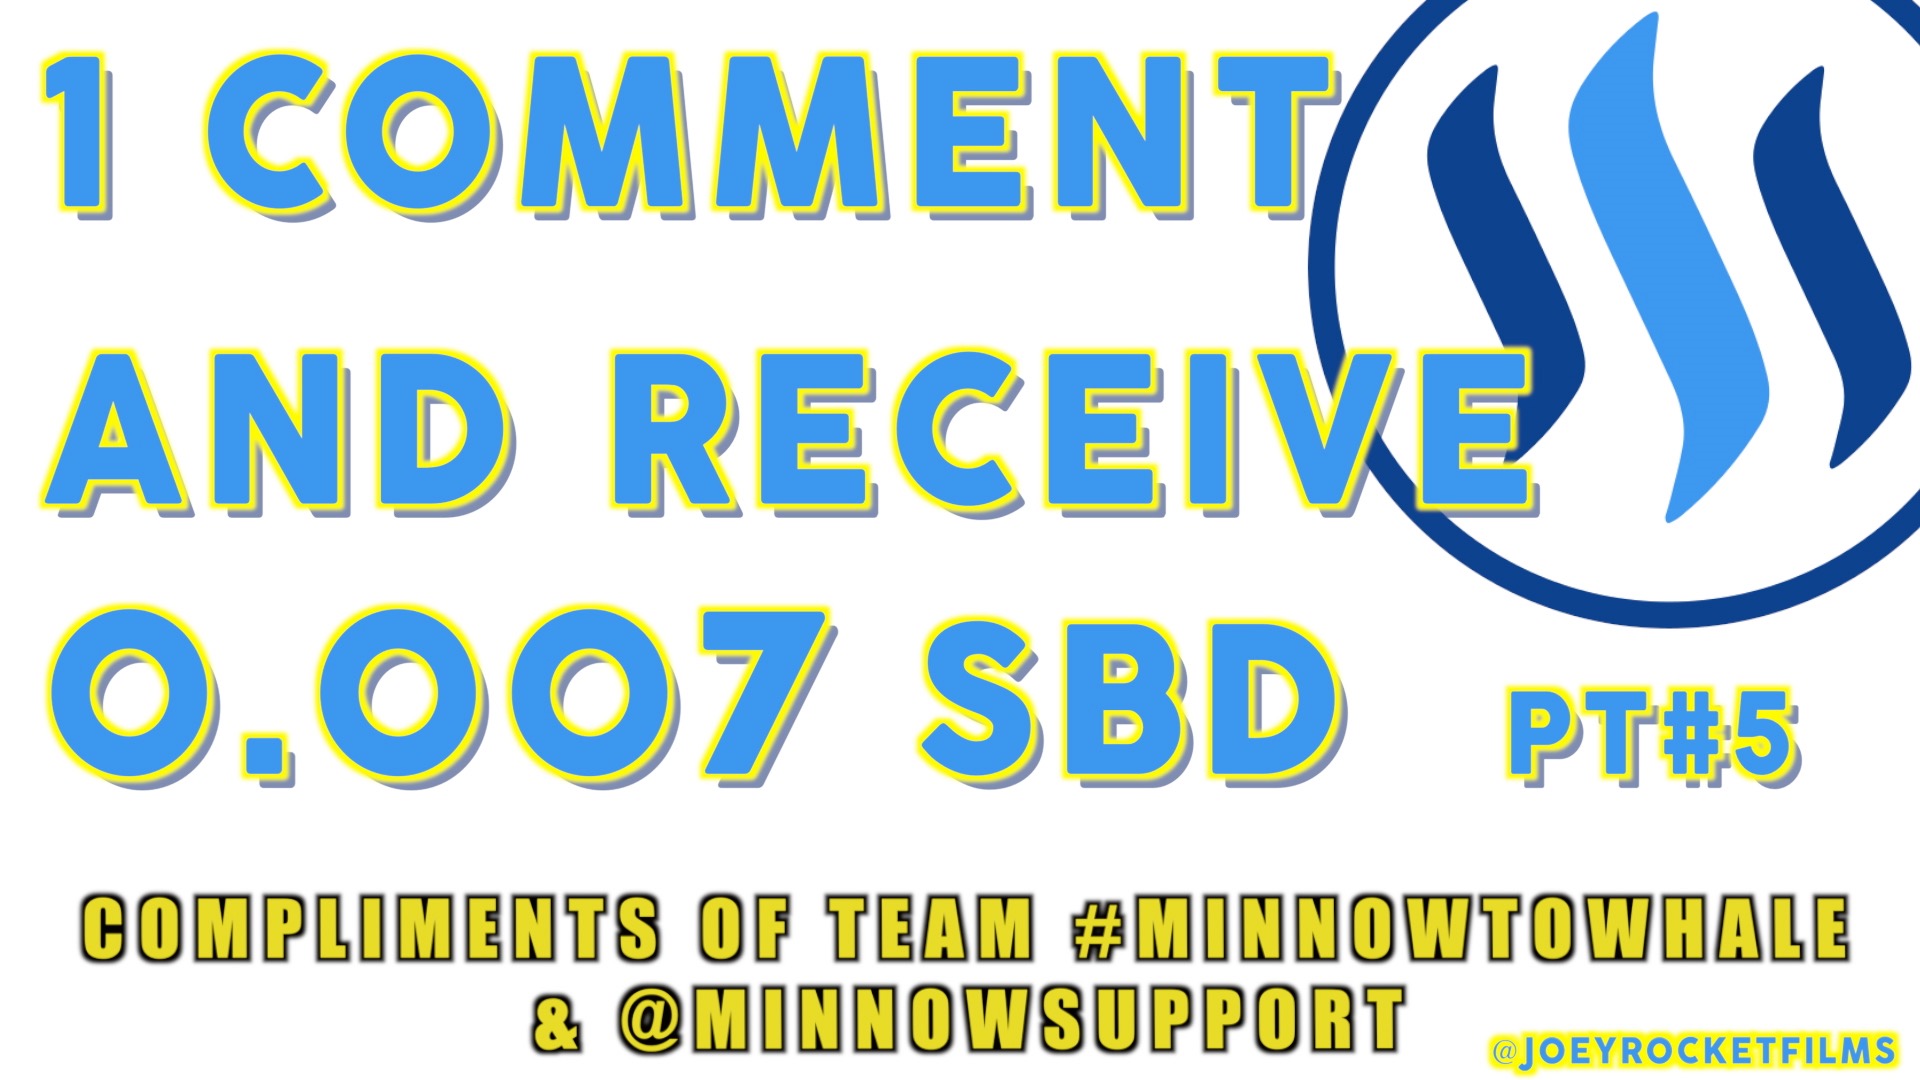 1 COMMENT AND RECEIVE 0.007 SBD .jpg